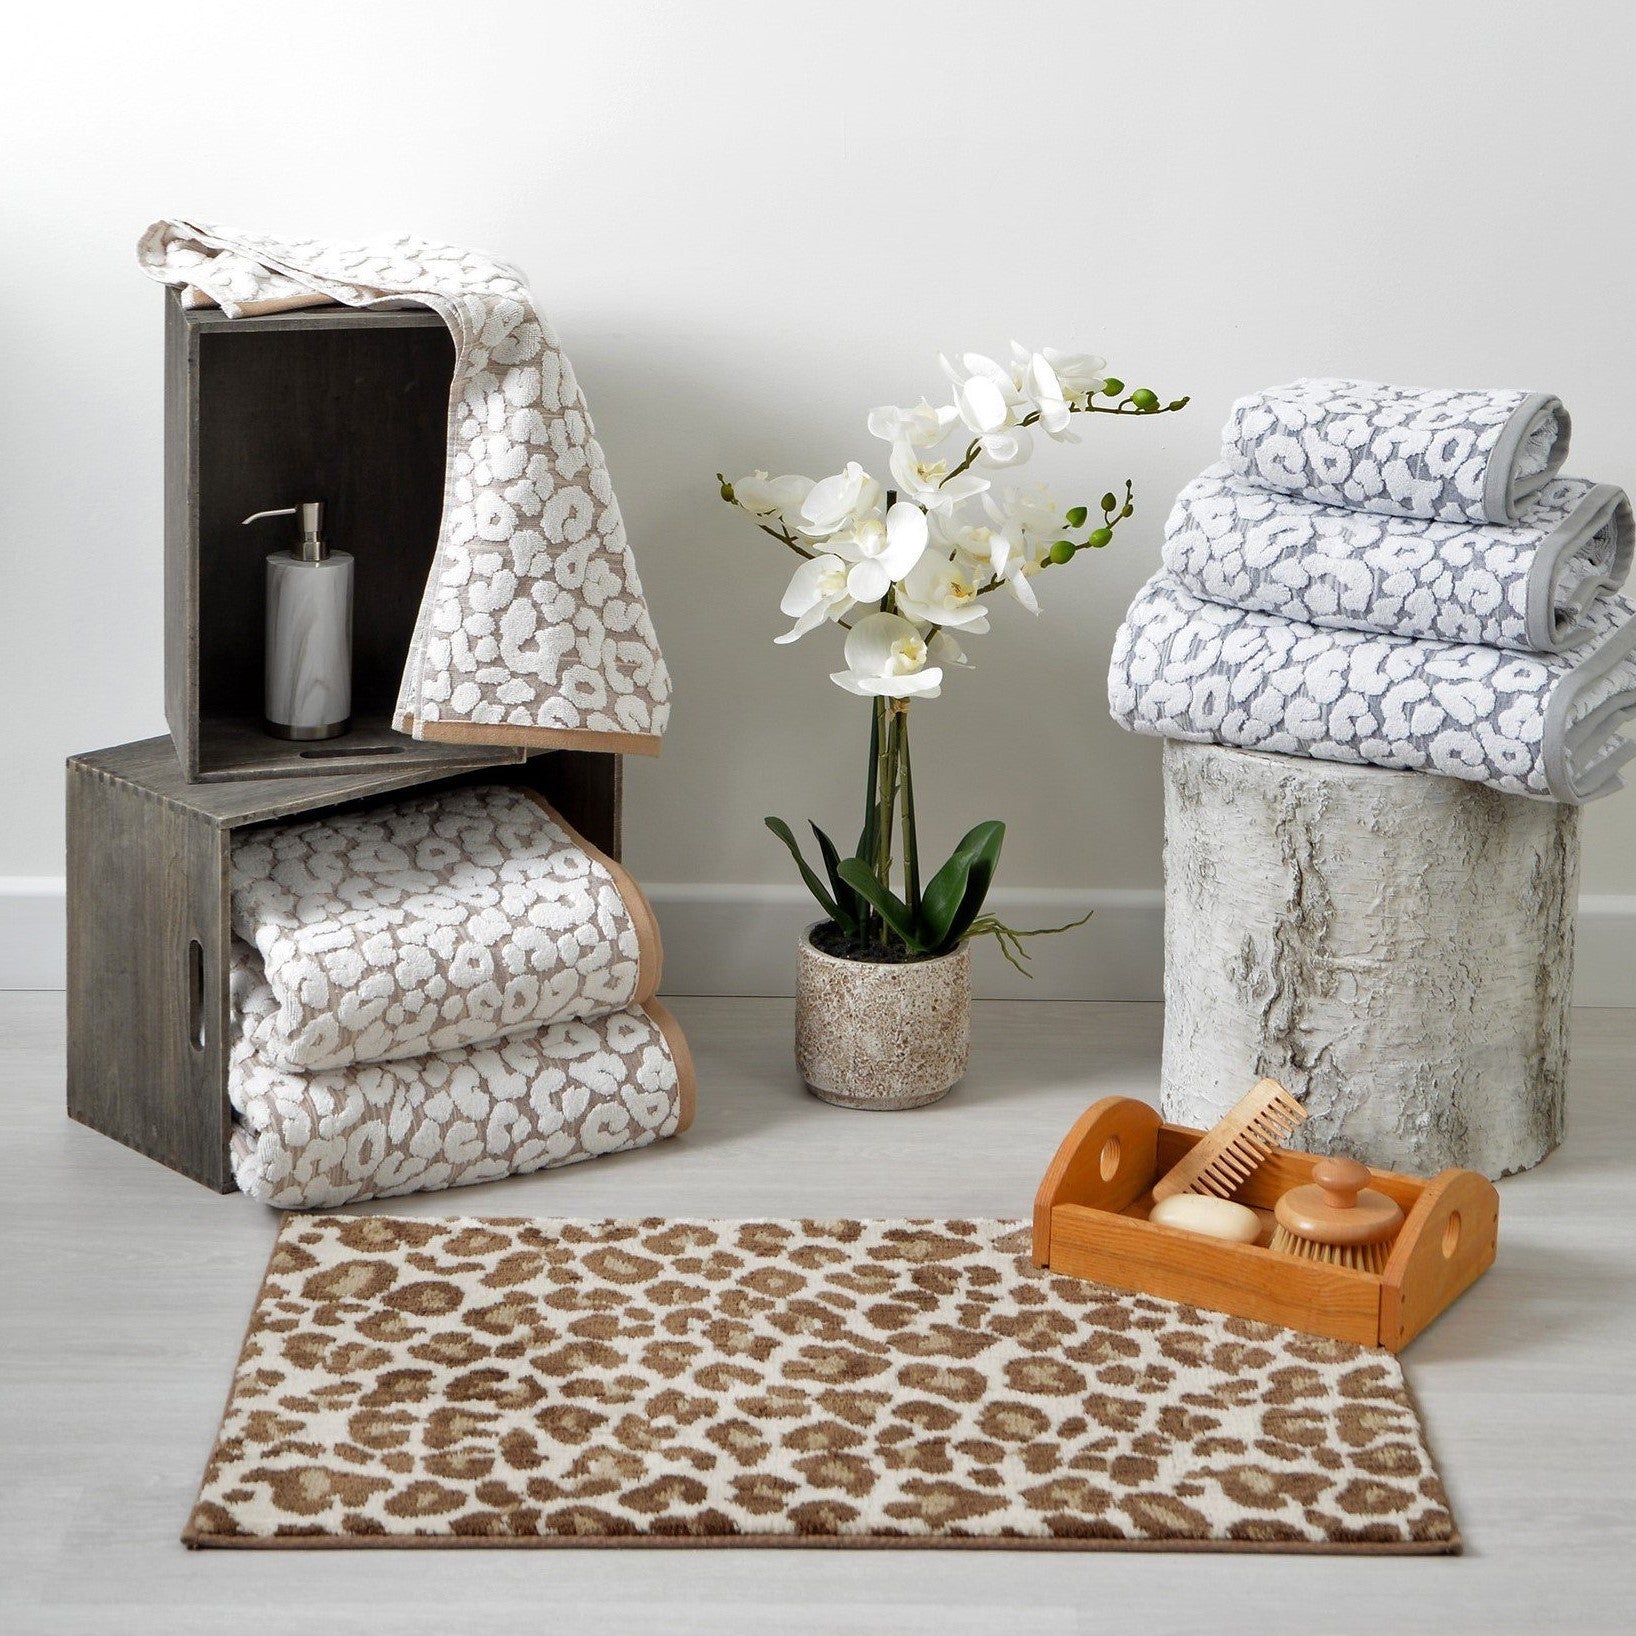 Leopard print collection - co-ordinated towels and bath mats